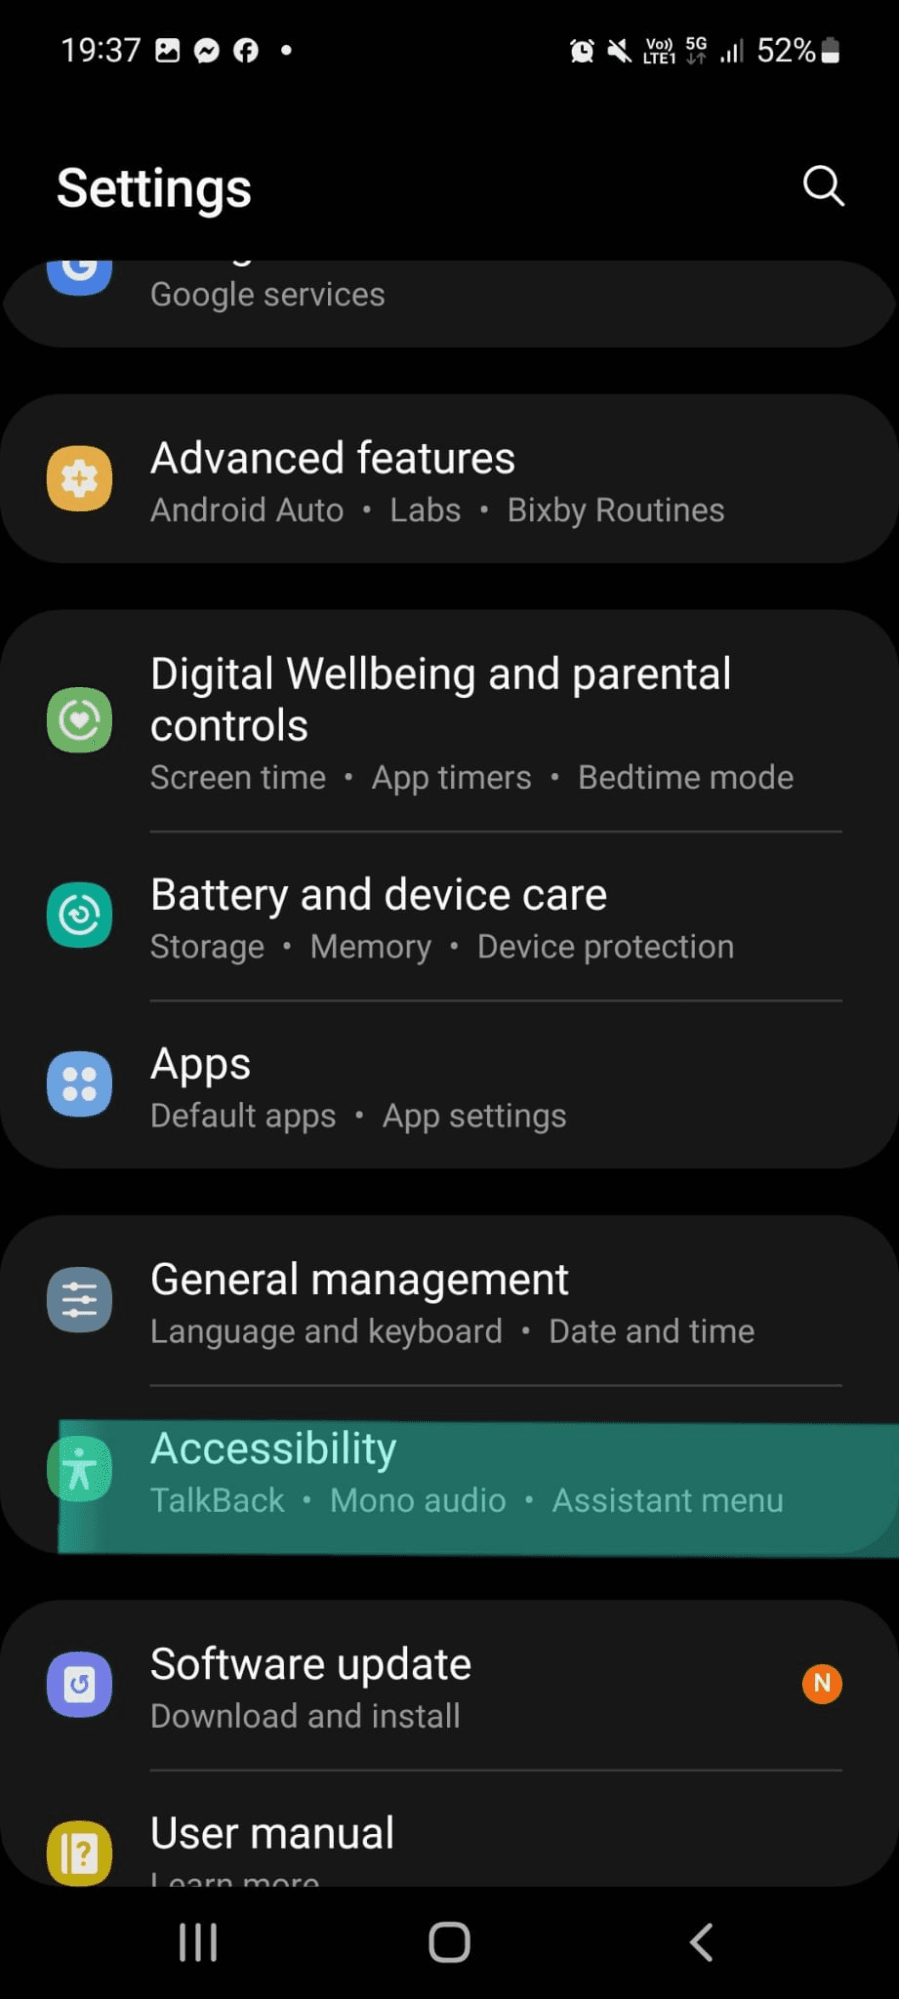 Go to  Settings and choose Accessibility